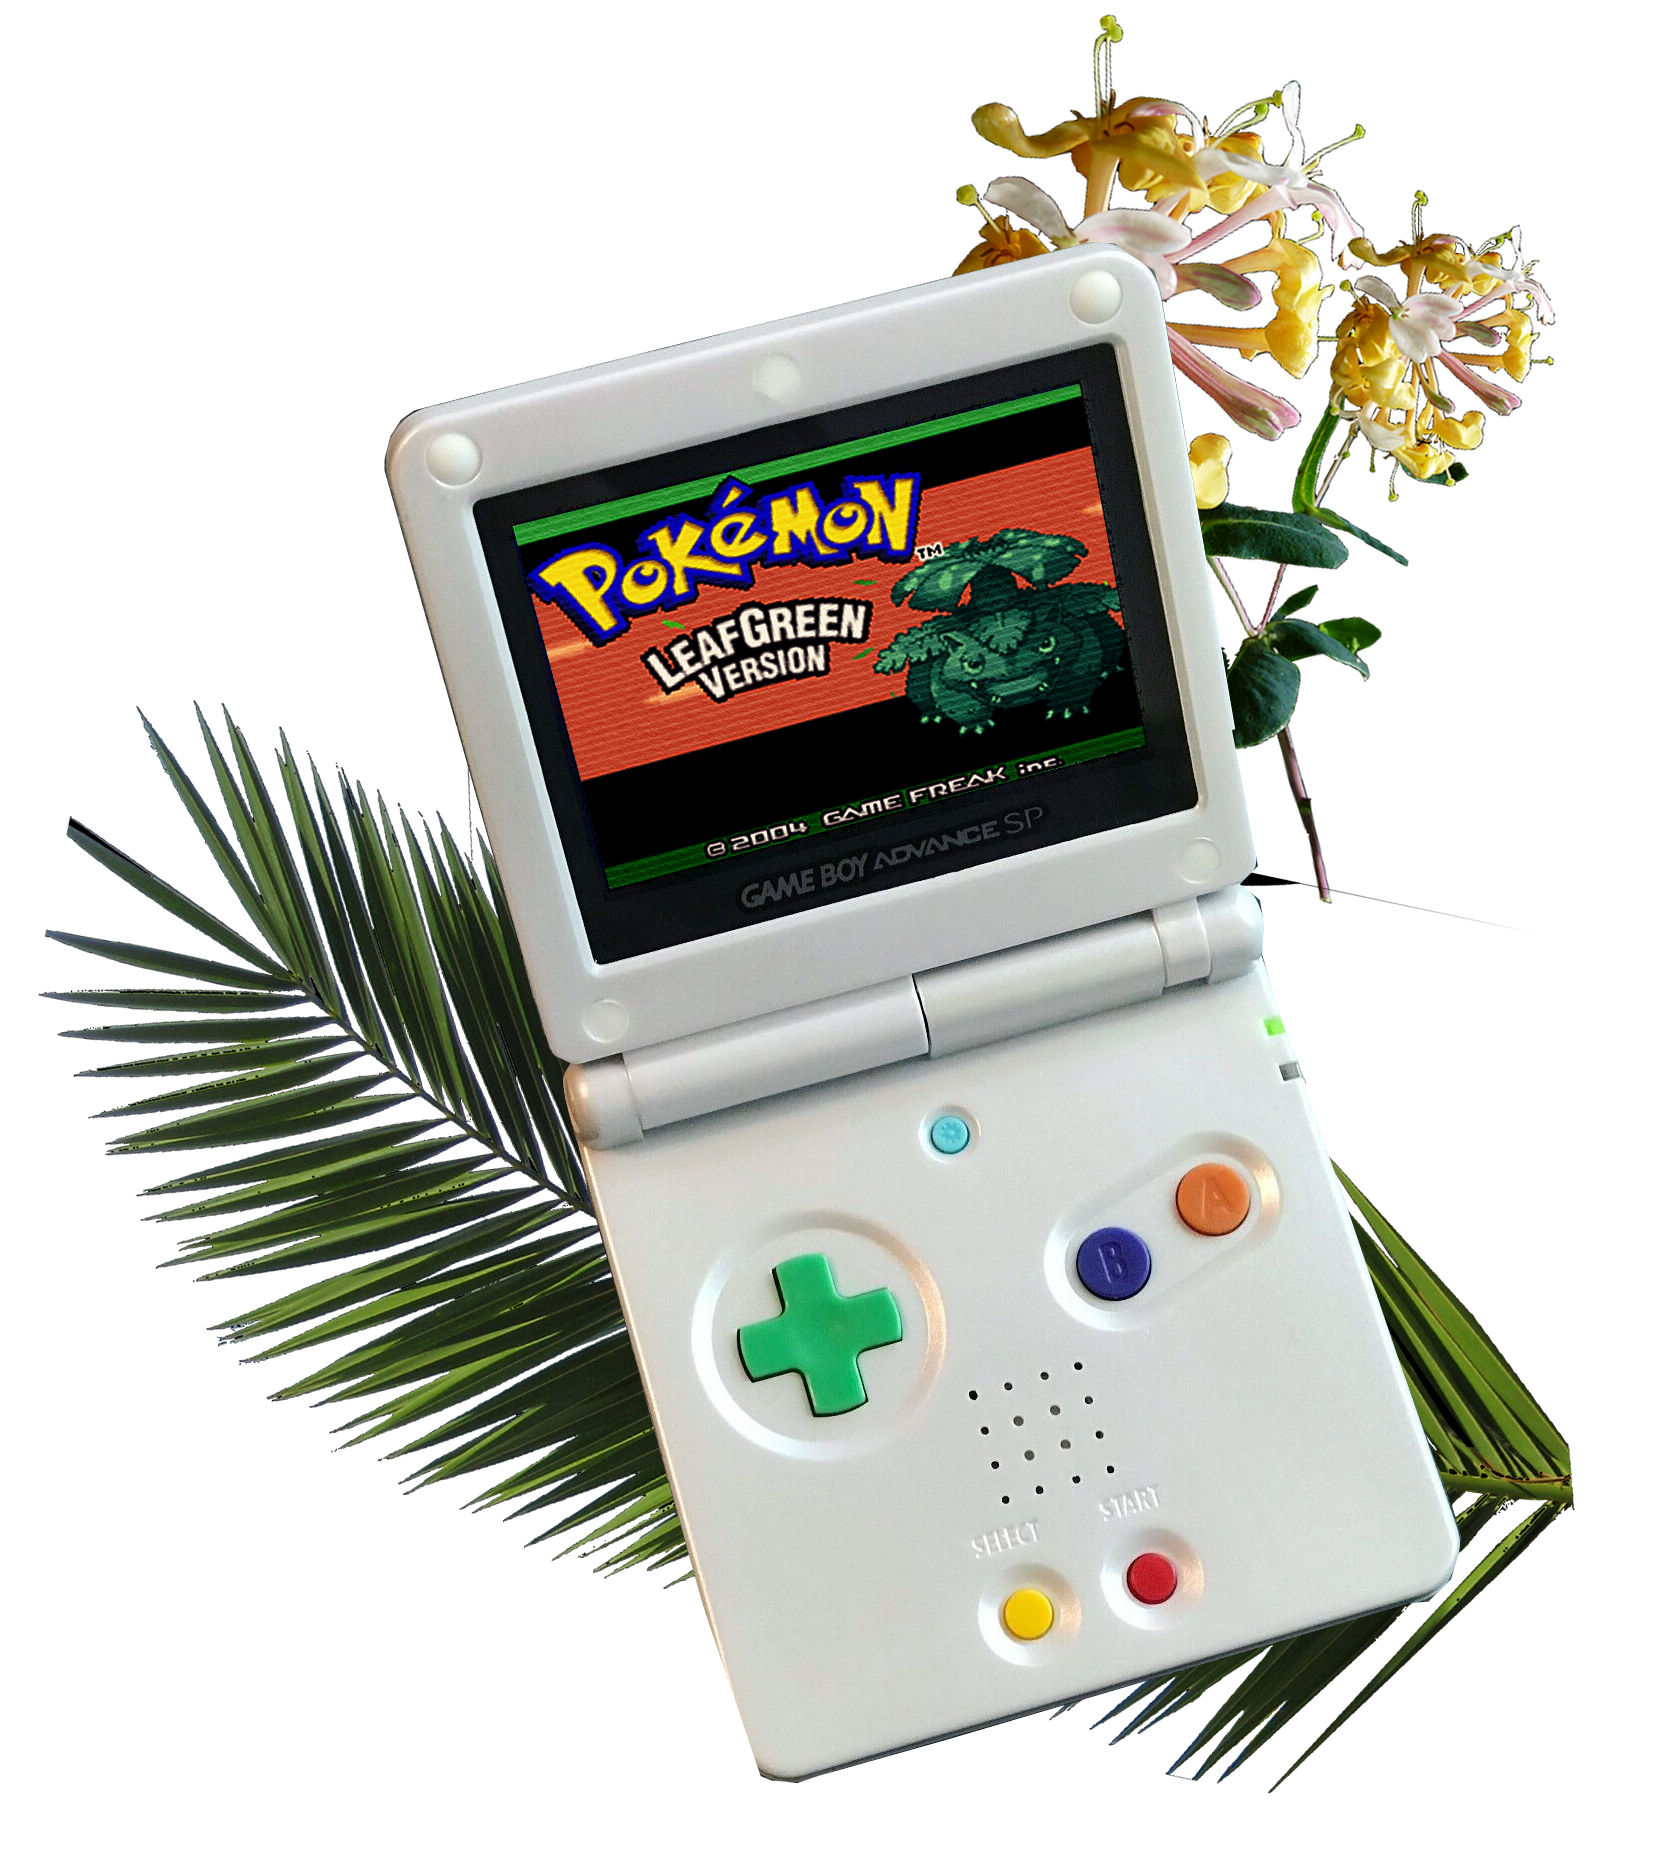 A light-gray gameboy advanced sp with multi-colored buttons is shown with Pokemon Leaf Green on the screen. Behind it is a palm leaf and a honeysuckle plant. Press this image to go to the main page.